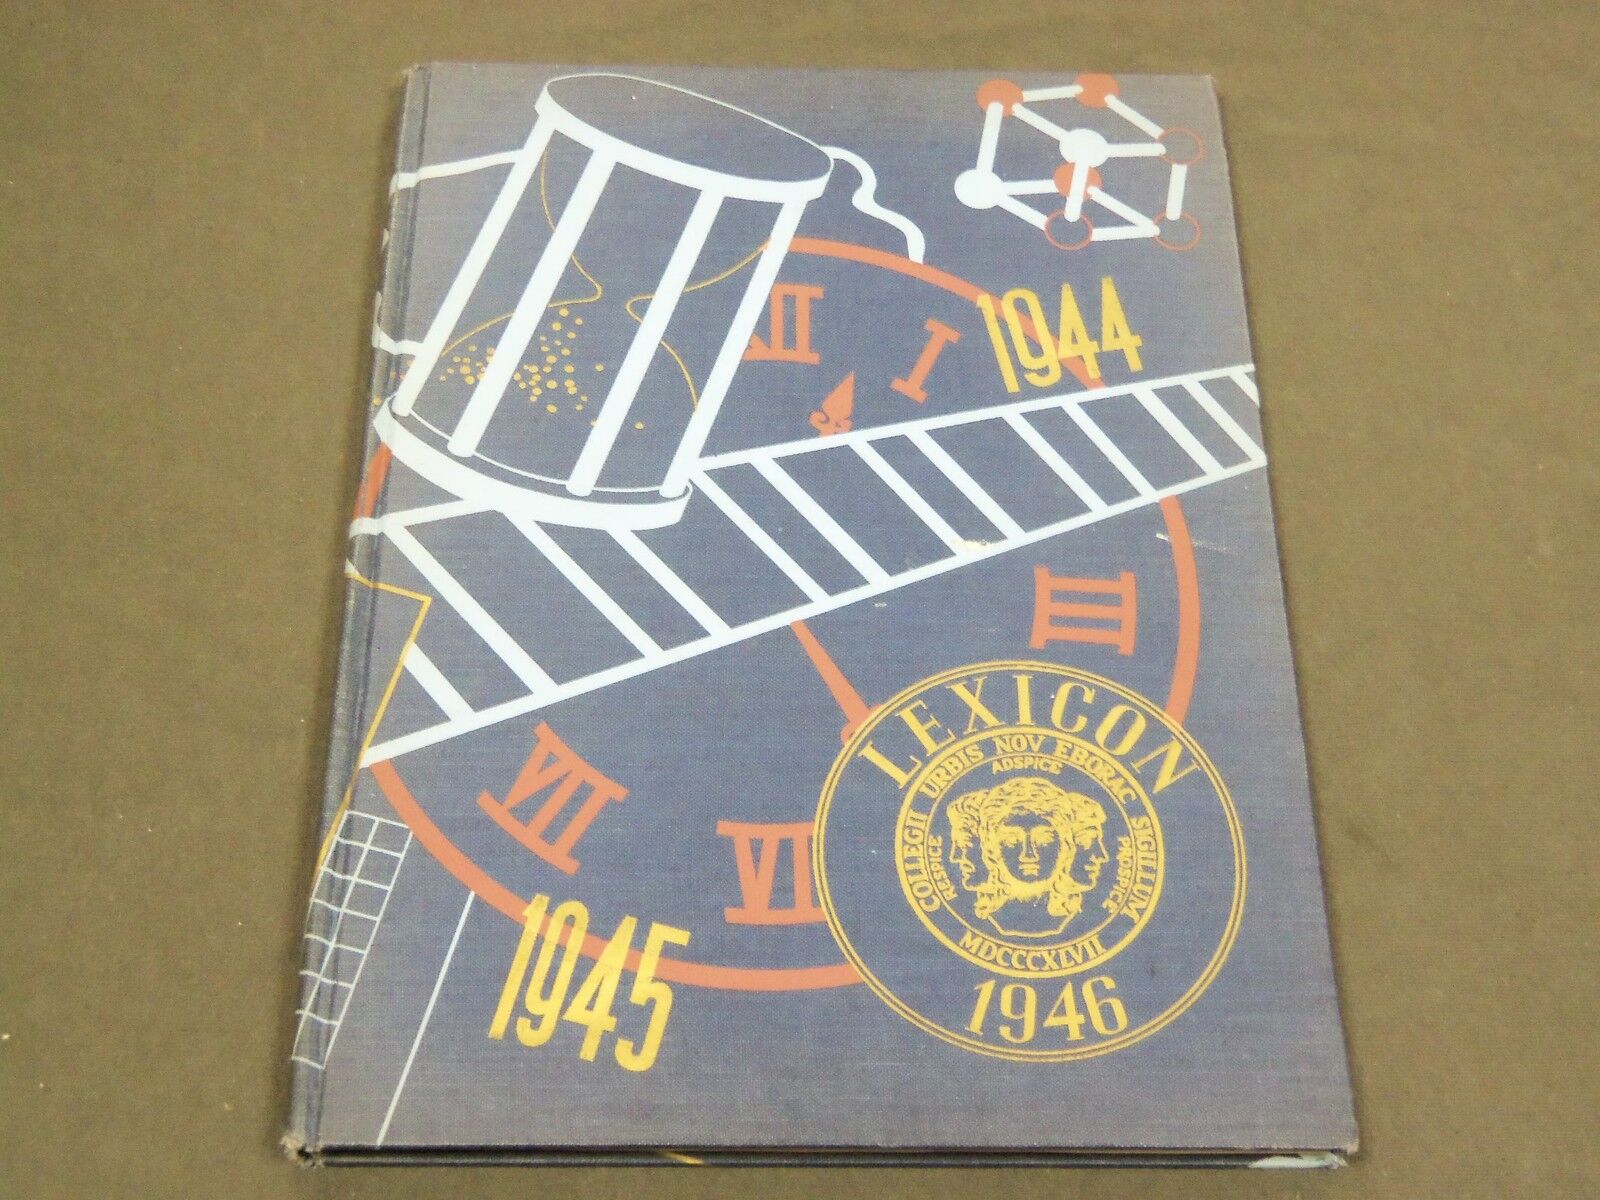 1946 CITY COLLEGE BUSINESS & CIVIC ADMIN SCHOOL YEARBOOK - NY - LEXICON - YB 830